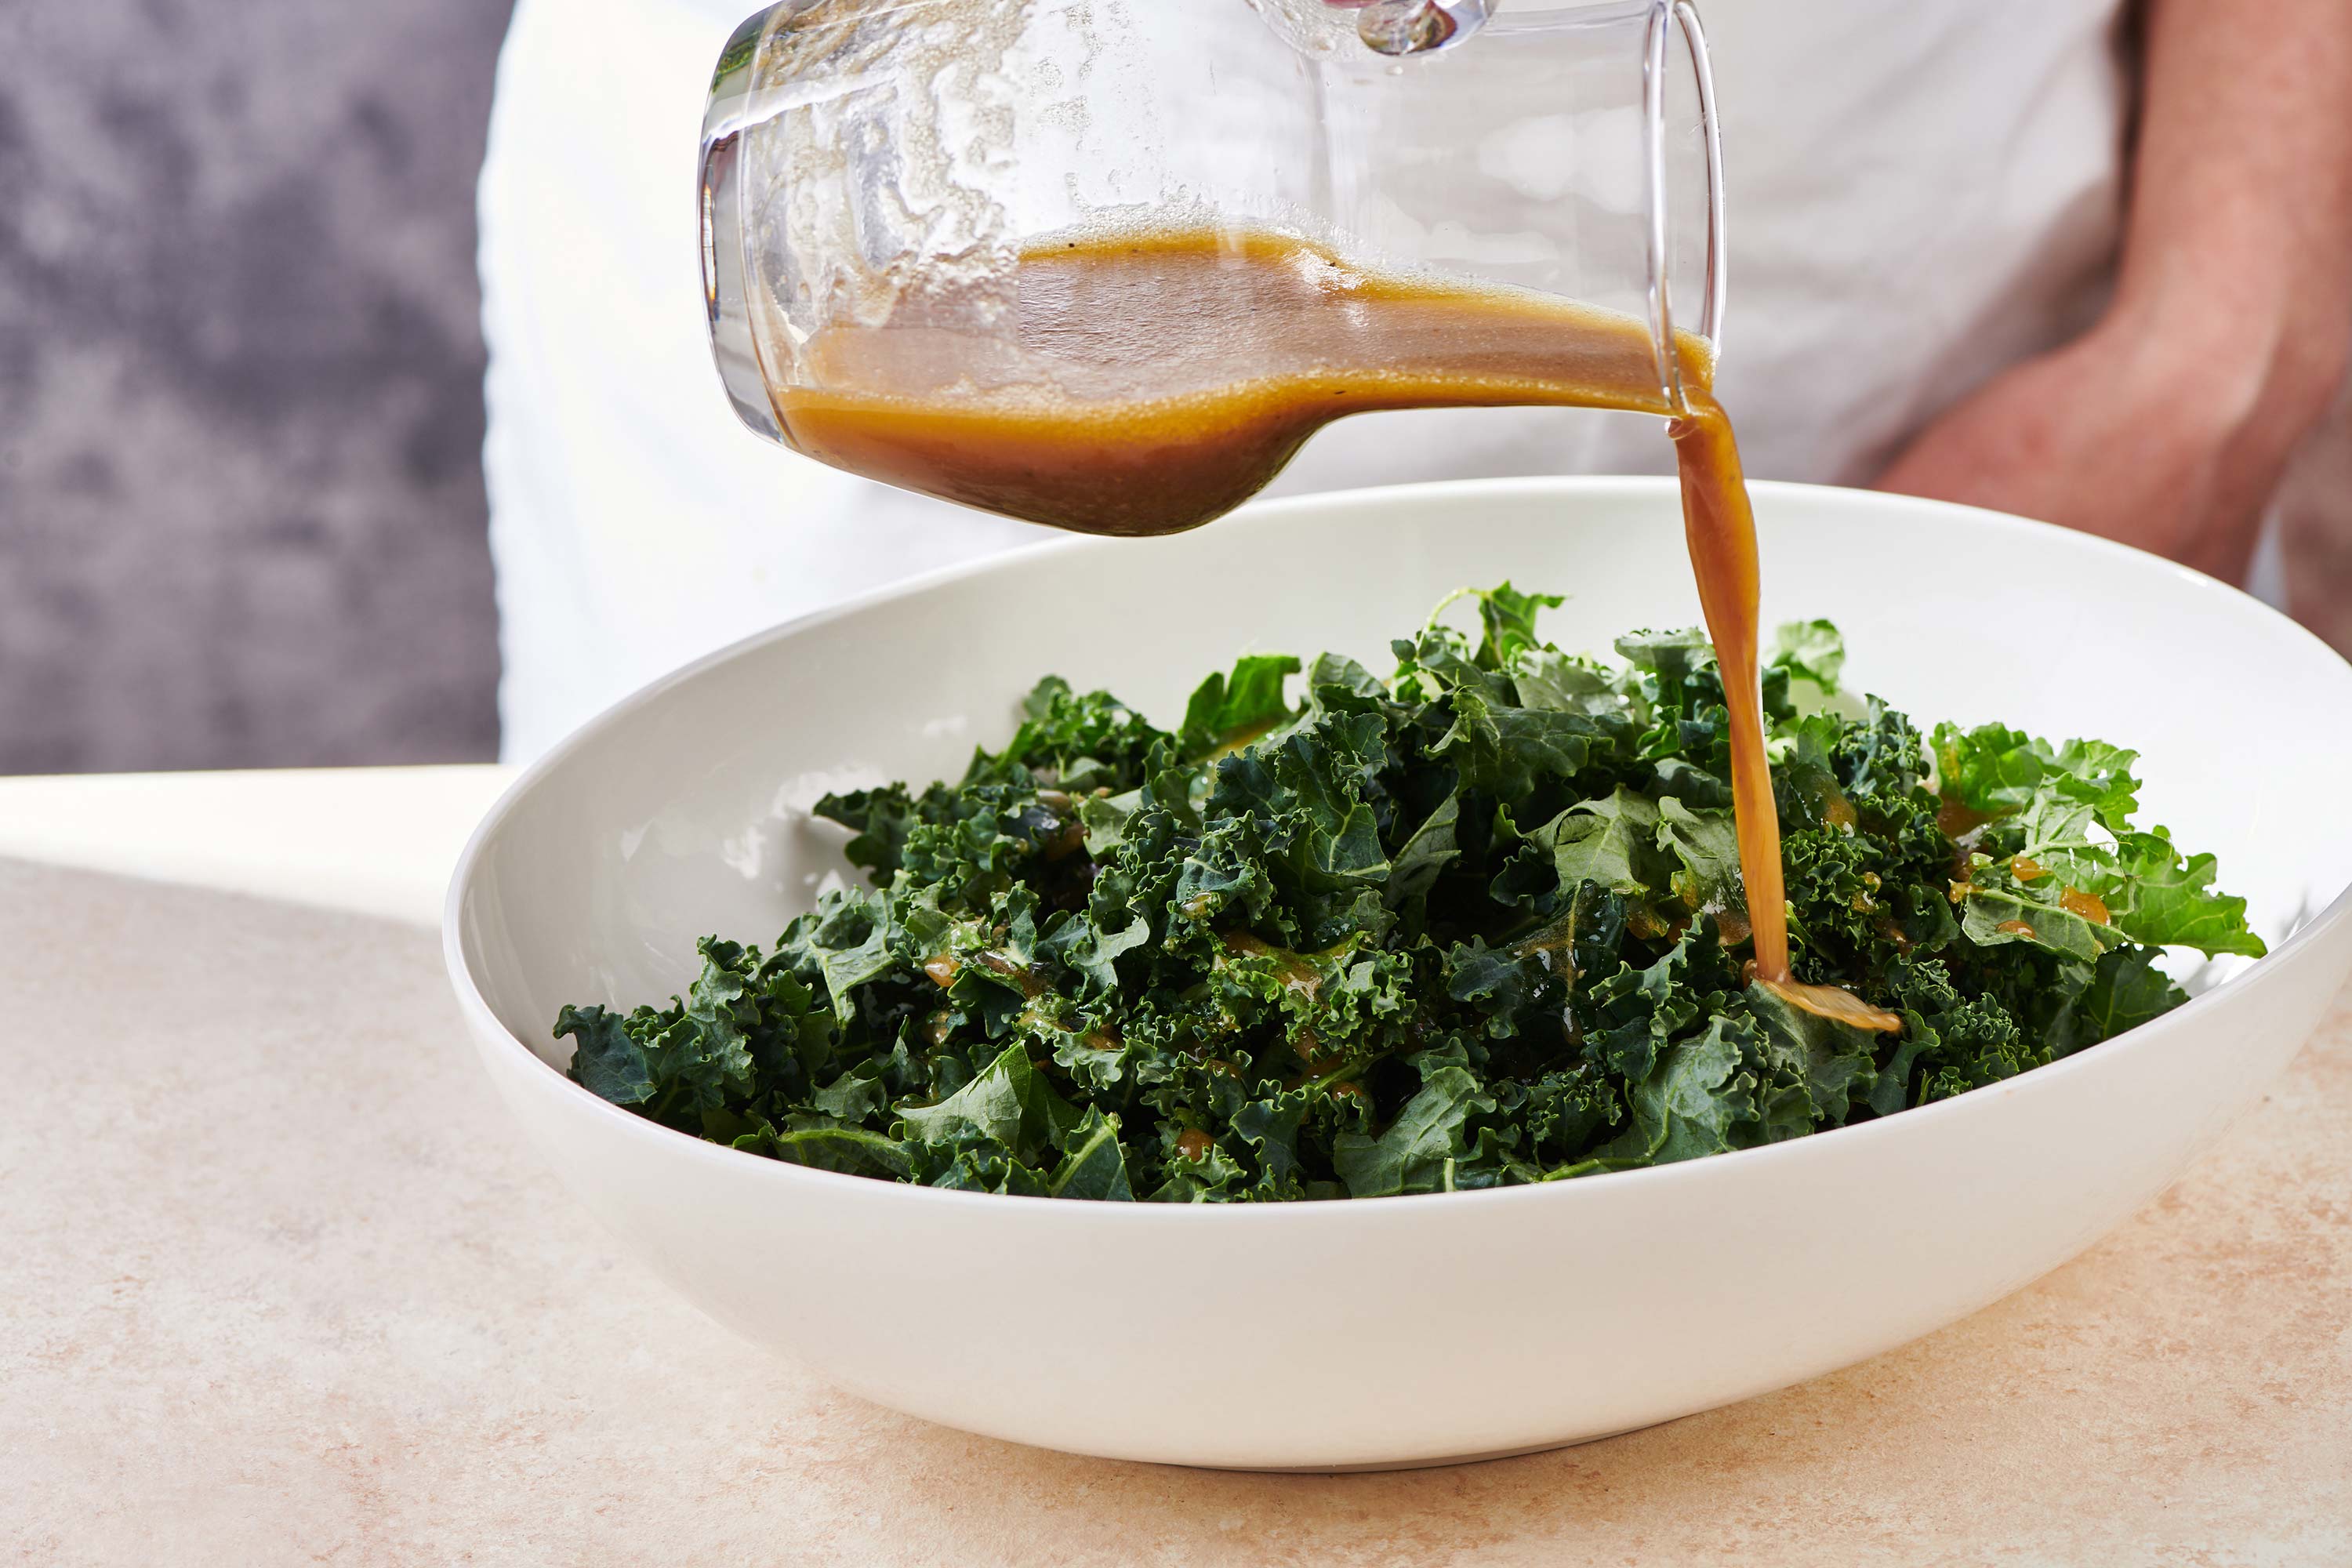 Apple Dijon dressing pouring over a bowl of kale.